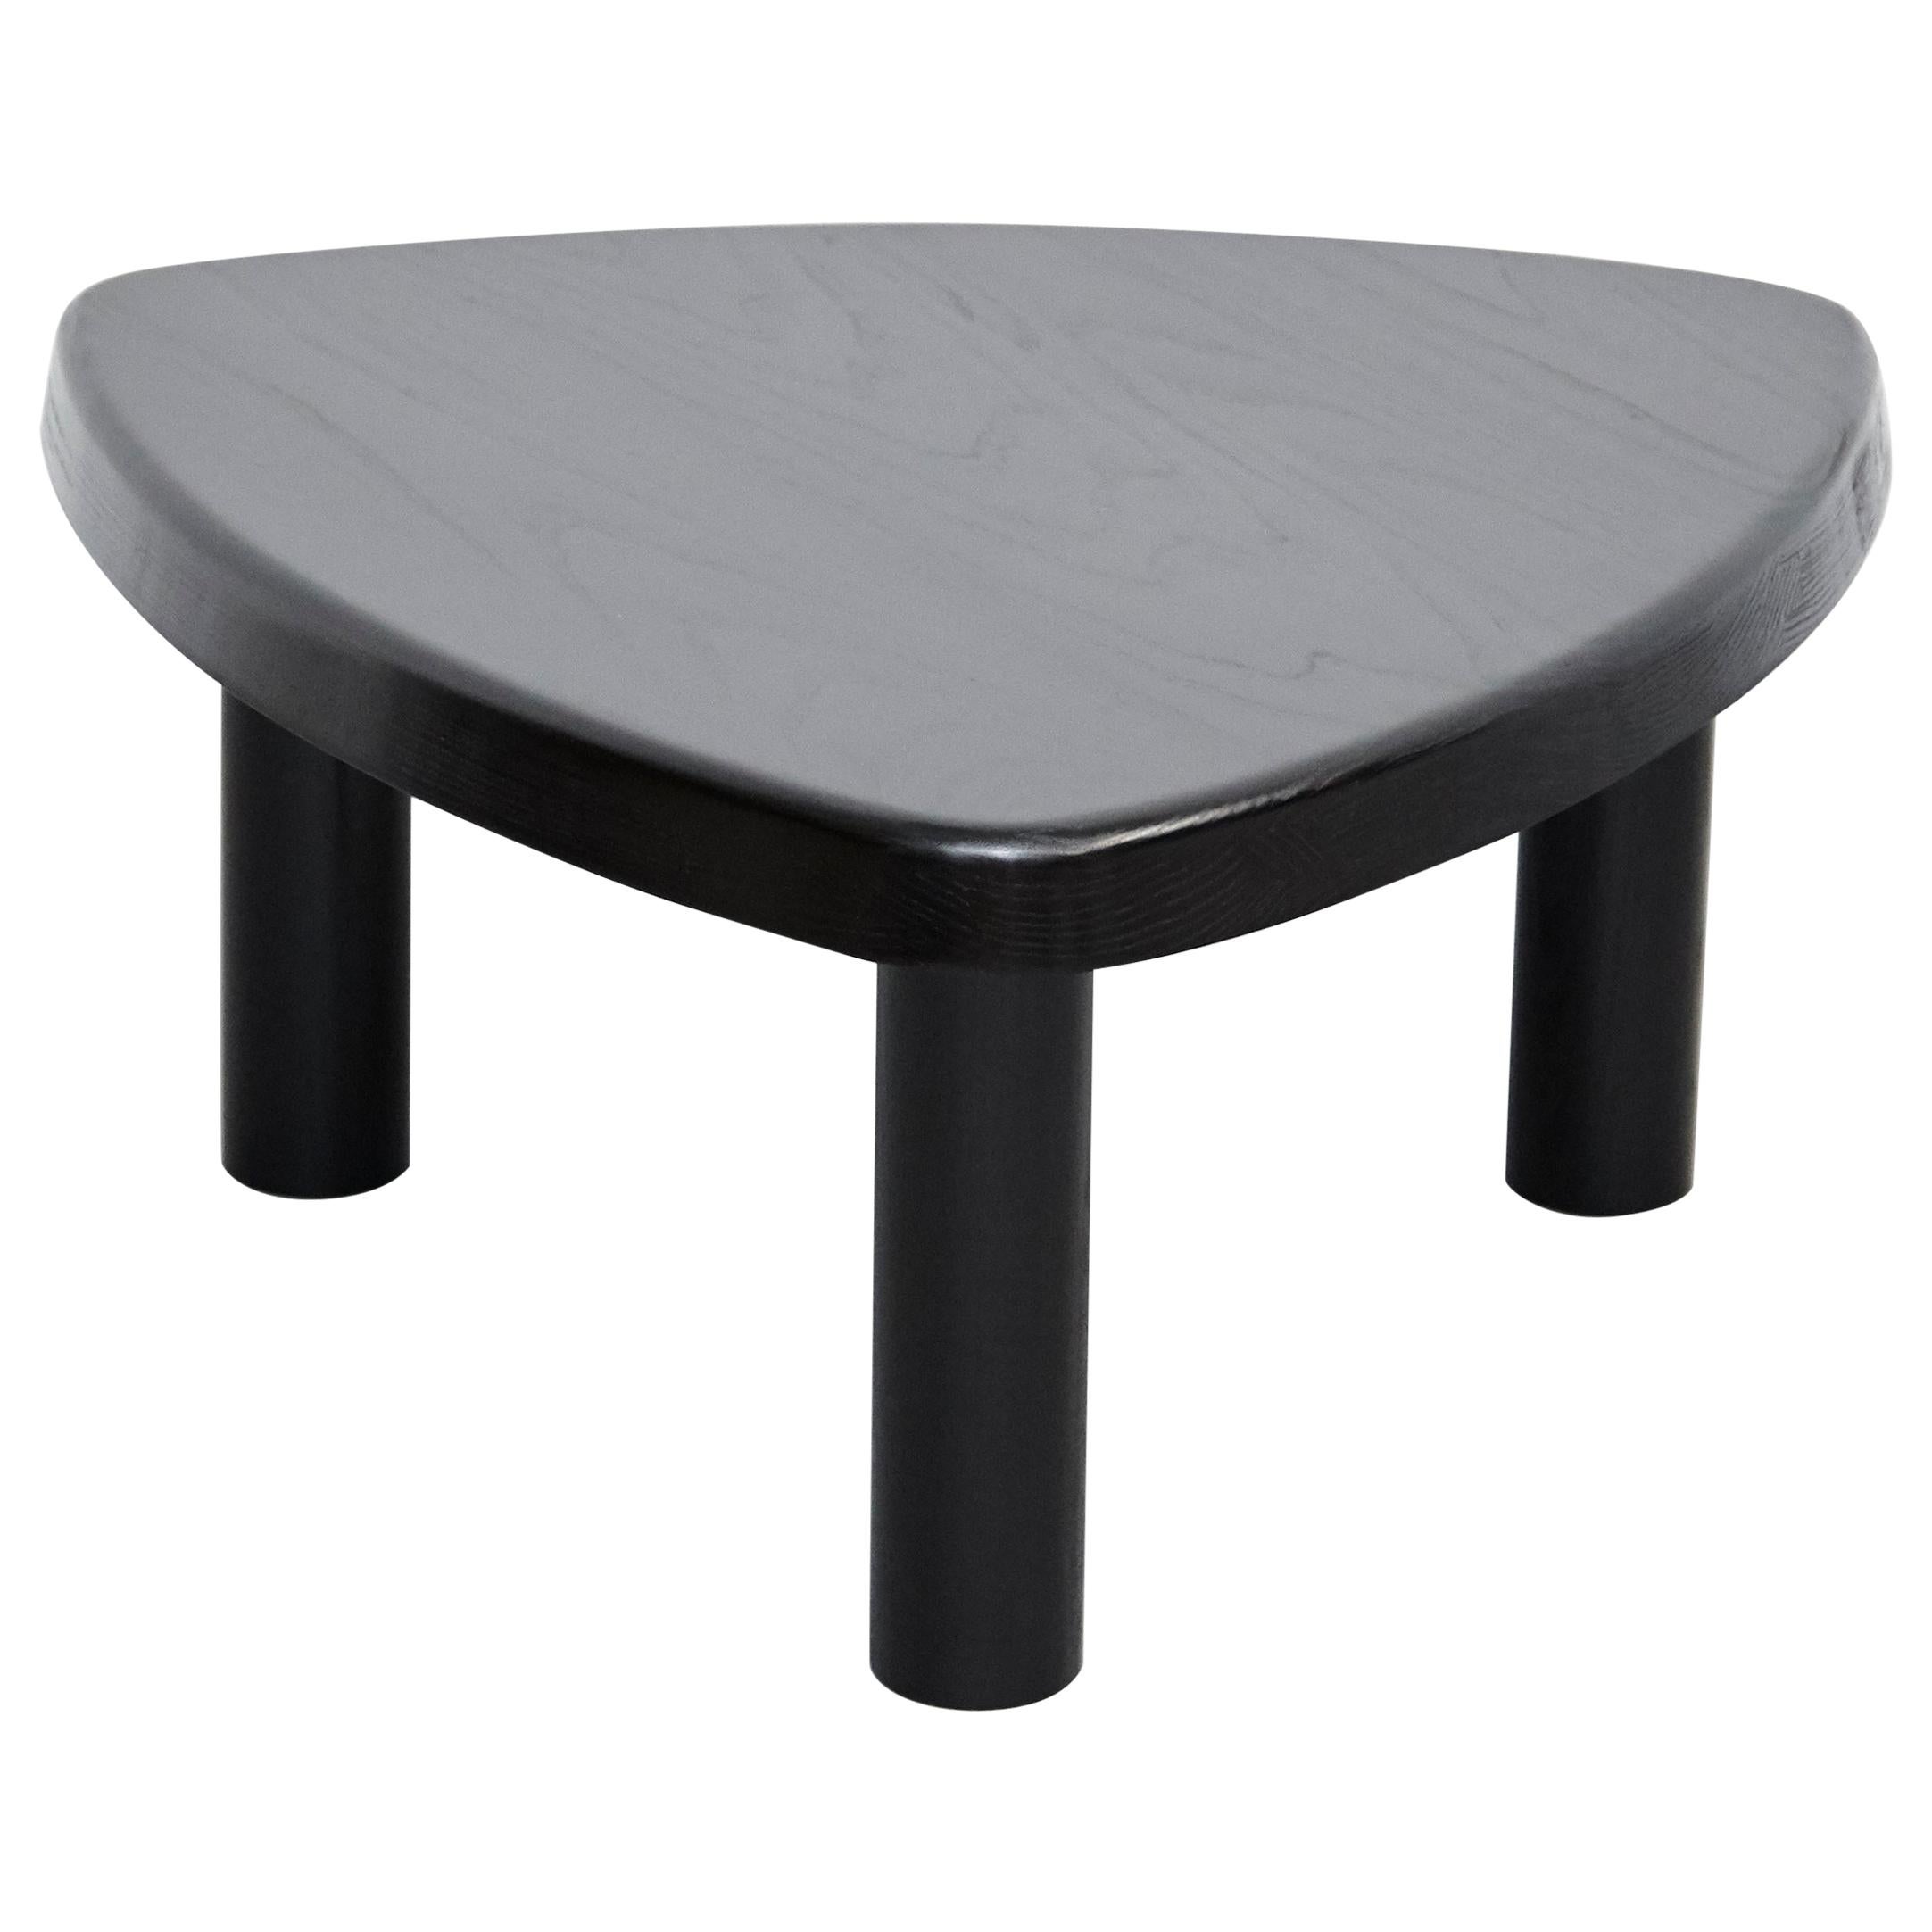 Pierre Chapo Special Black Wood Edition T23 Side Table